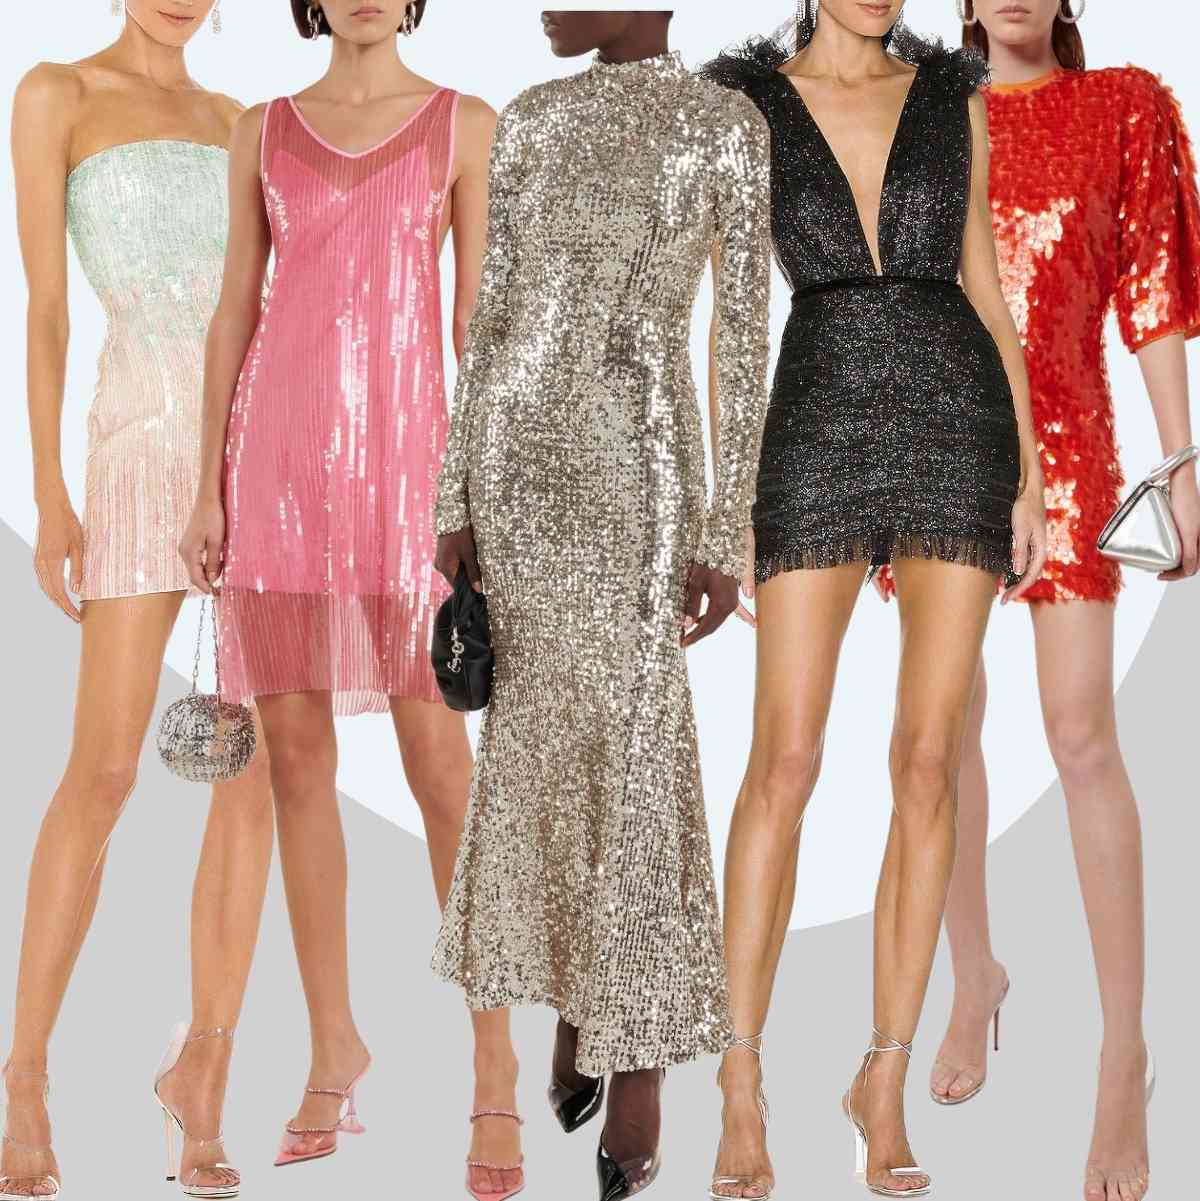 Collage of 6 women wearing different clear heel outfits with sequin dresses.